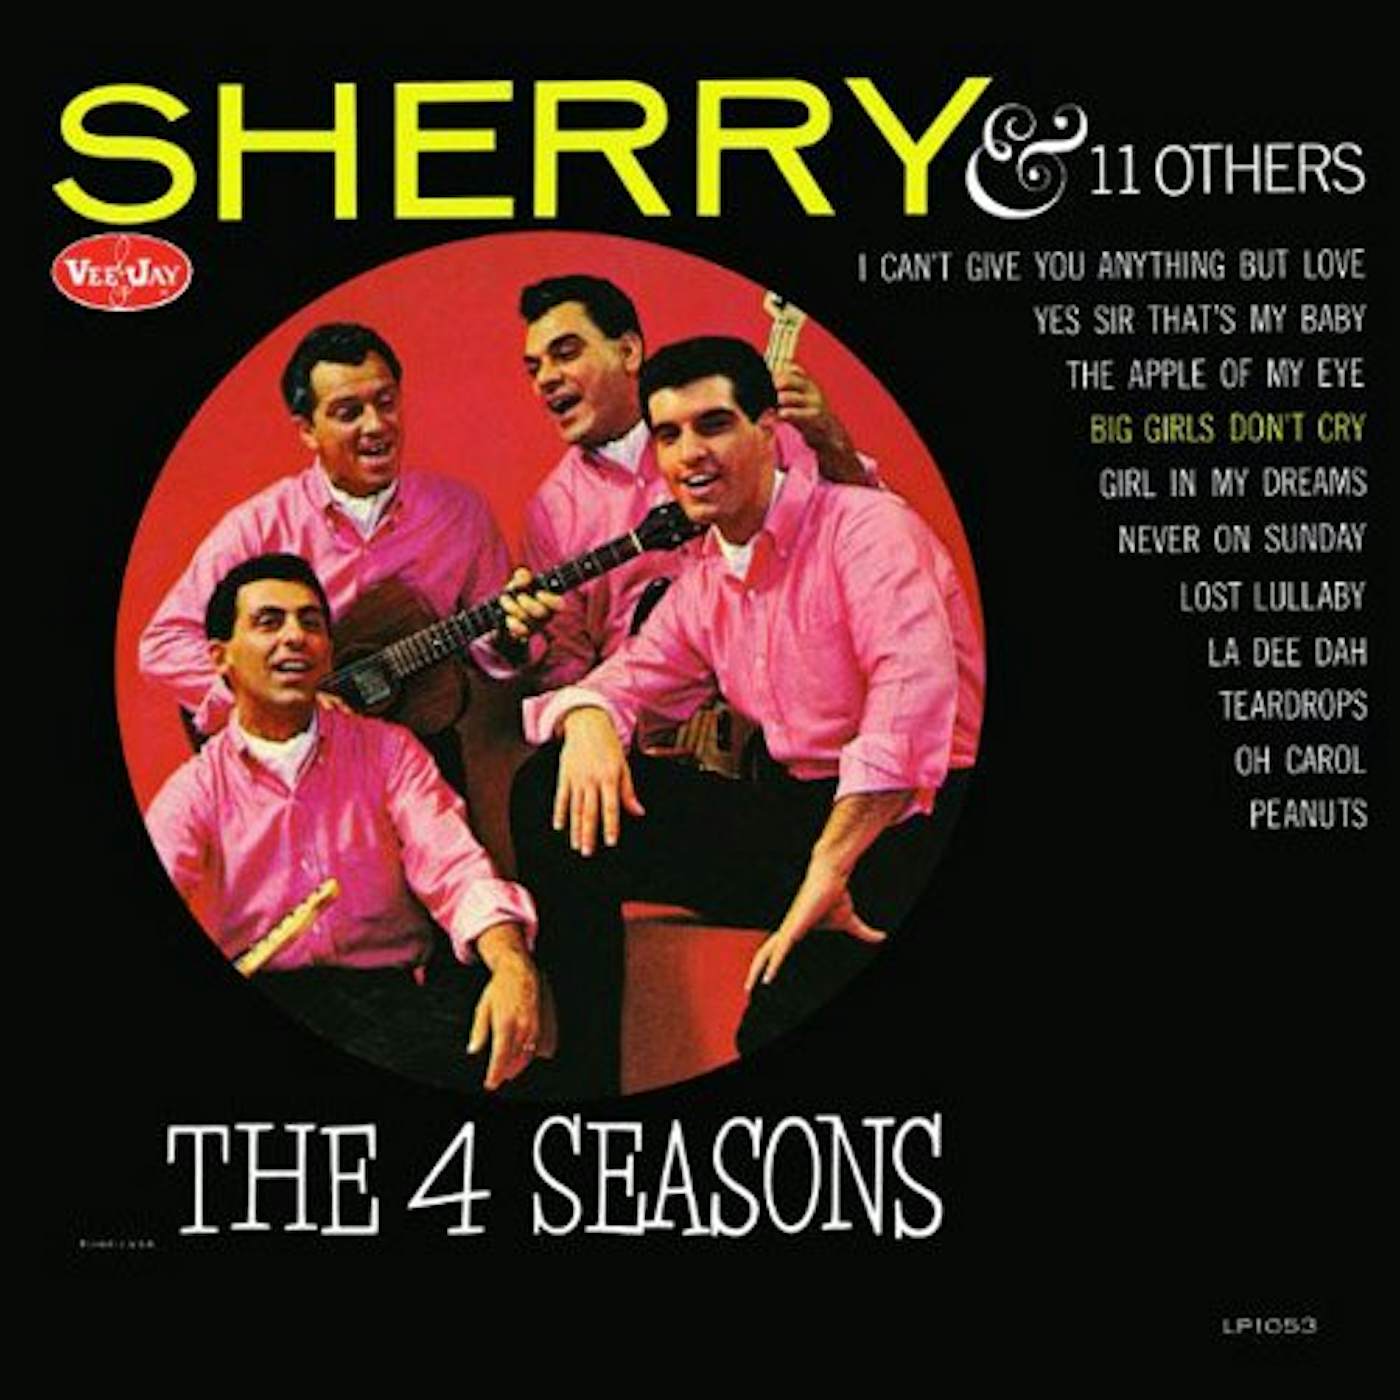 Four Seasons SHERRY & 11 OTHERS (LIMITED MONO MINI LP SLEEVE) CD